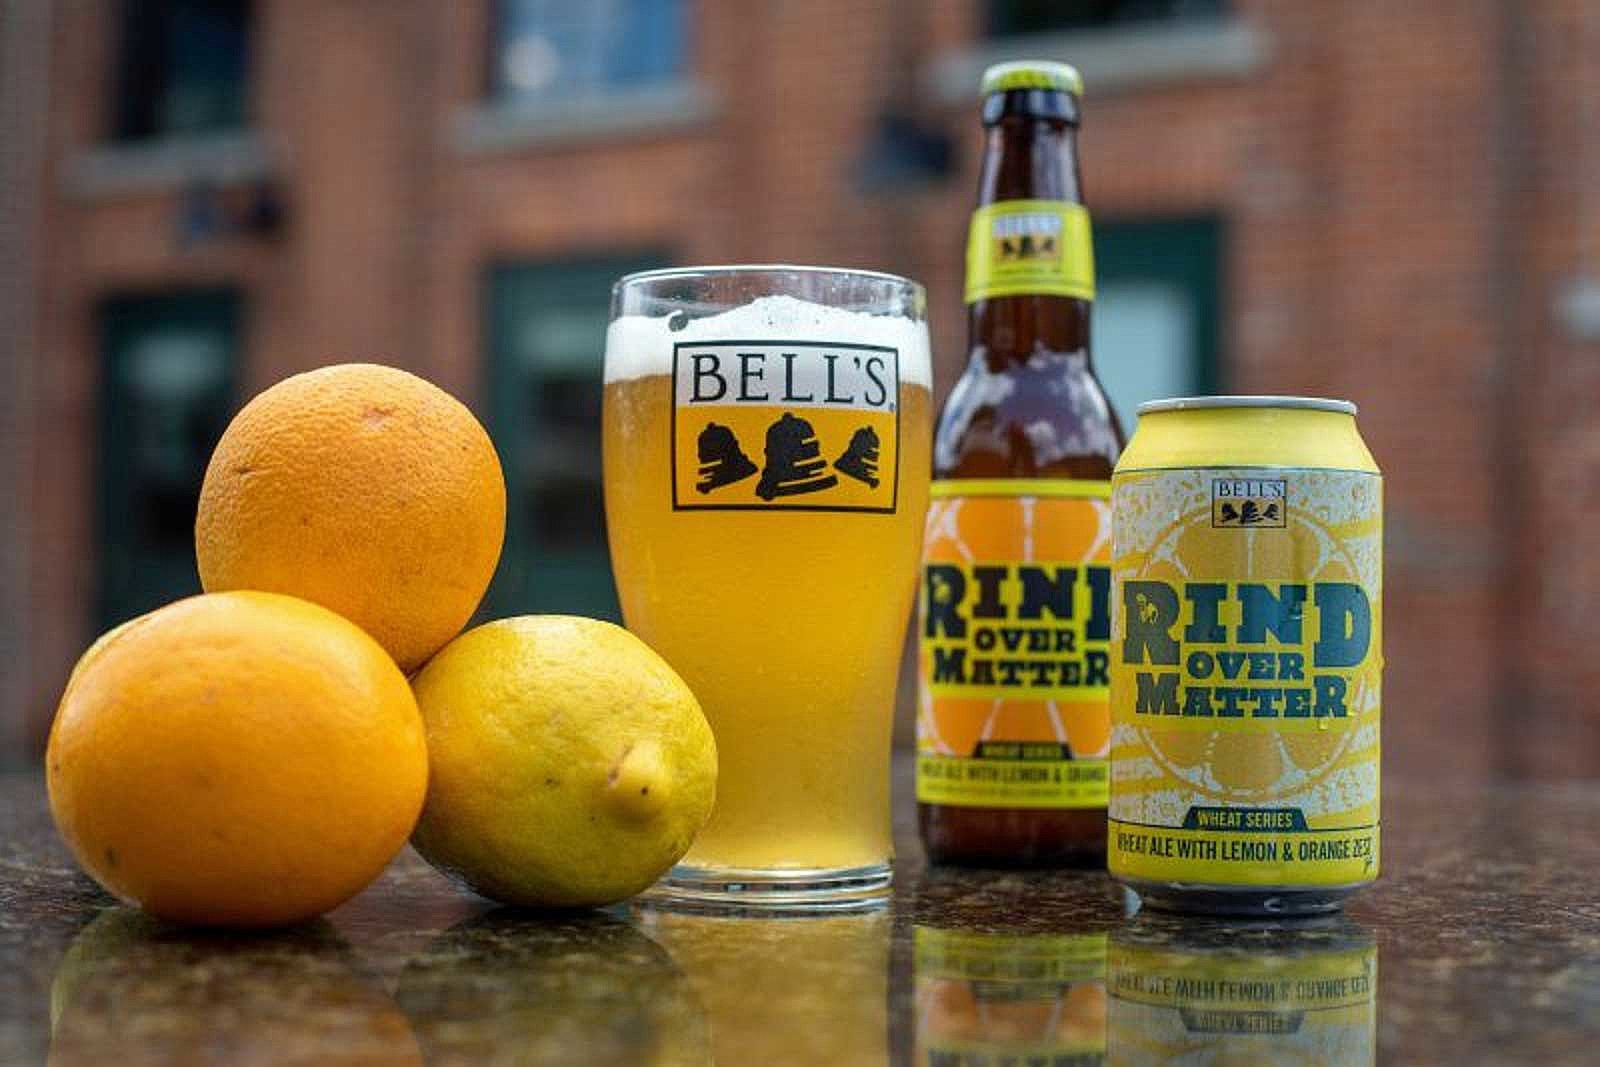 The Gluten-Free Beer of Your Dreams: CELIA Lager